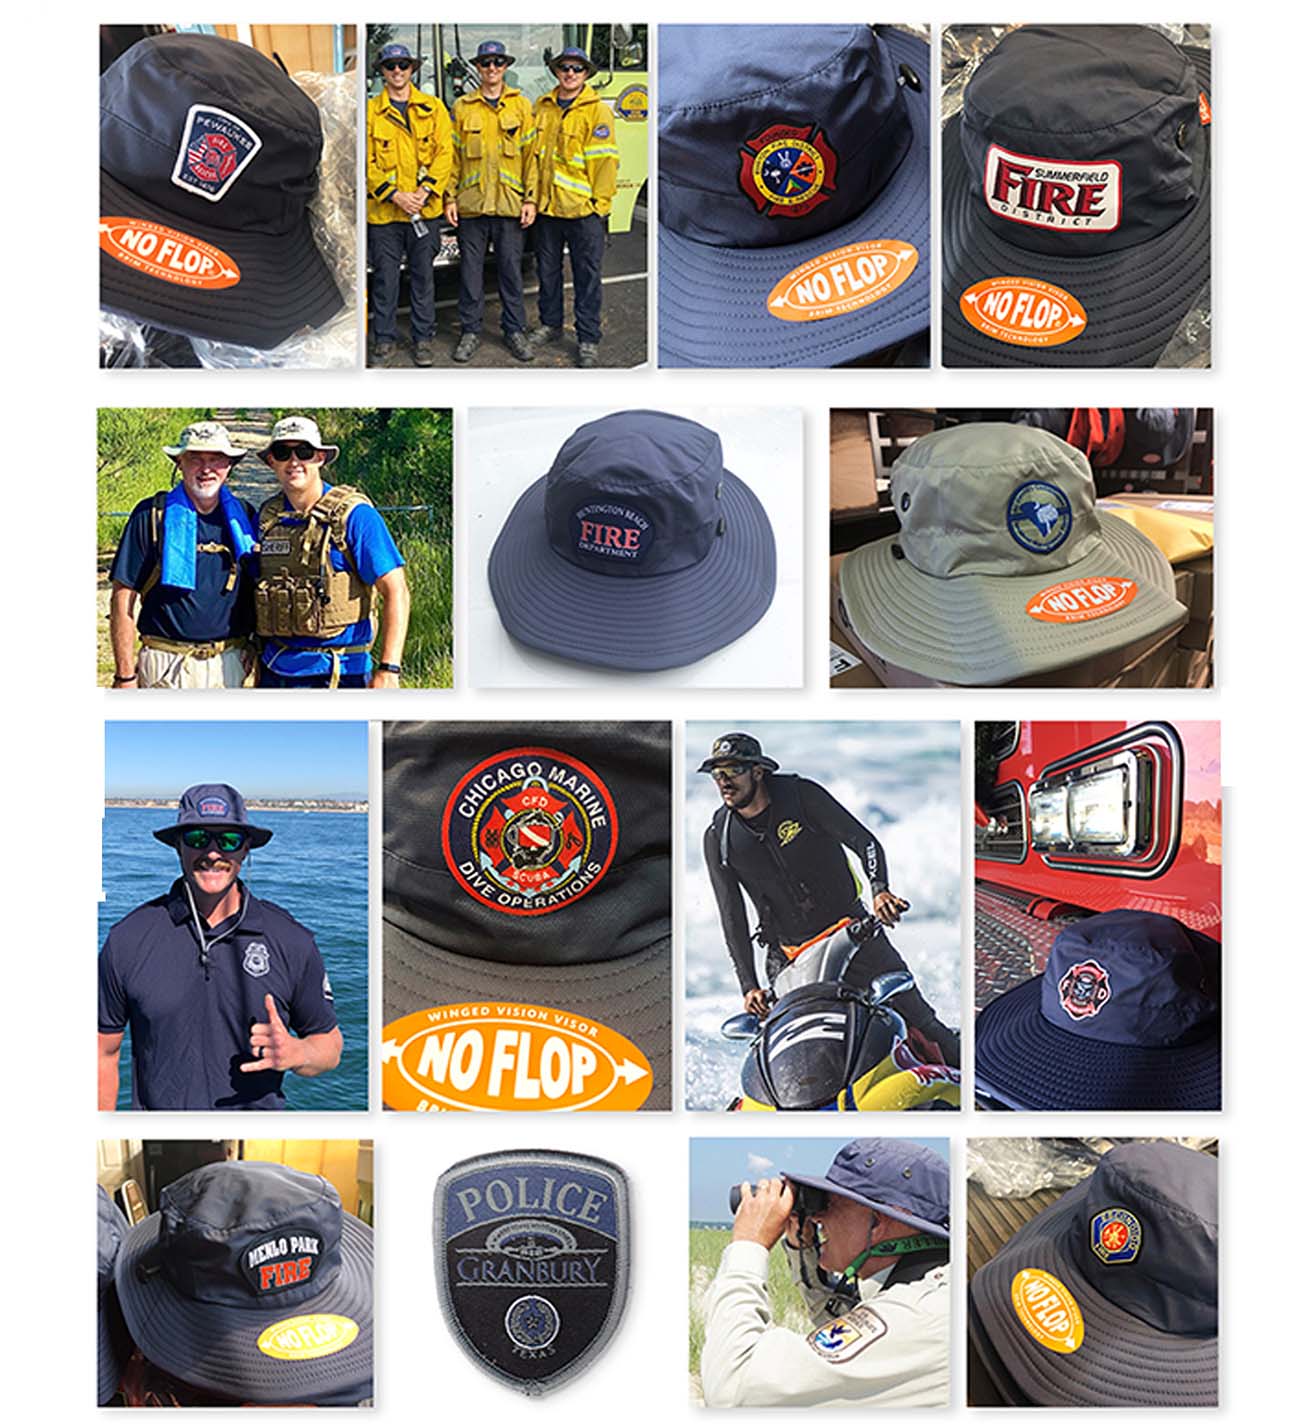 The best sun hat ever made for Lifeguards, Firefighters and Law Enforcement. We are proud to offer a custom program for you men and women out there protecting our safety, property and rights. Working outdoors can expose you to harmful UV rays. Offering you the best sun hat possible that doesn't get in the way while doing your job is our mission.  We offer your logo on a custom woven patch that is sealed to the hat. Please contact Jurgen@sheltahats.com for details on how we can get your department some Shelta! 